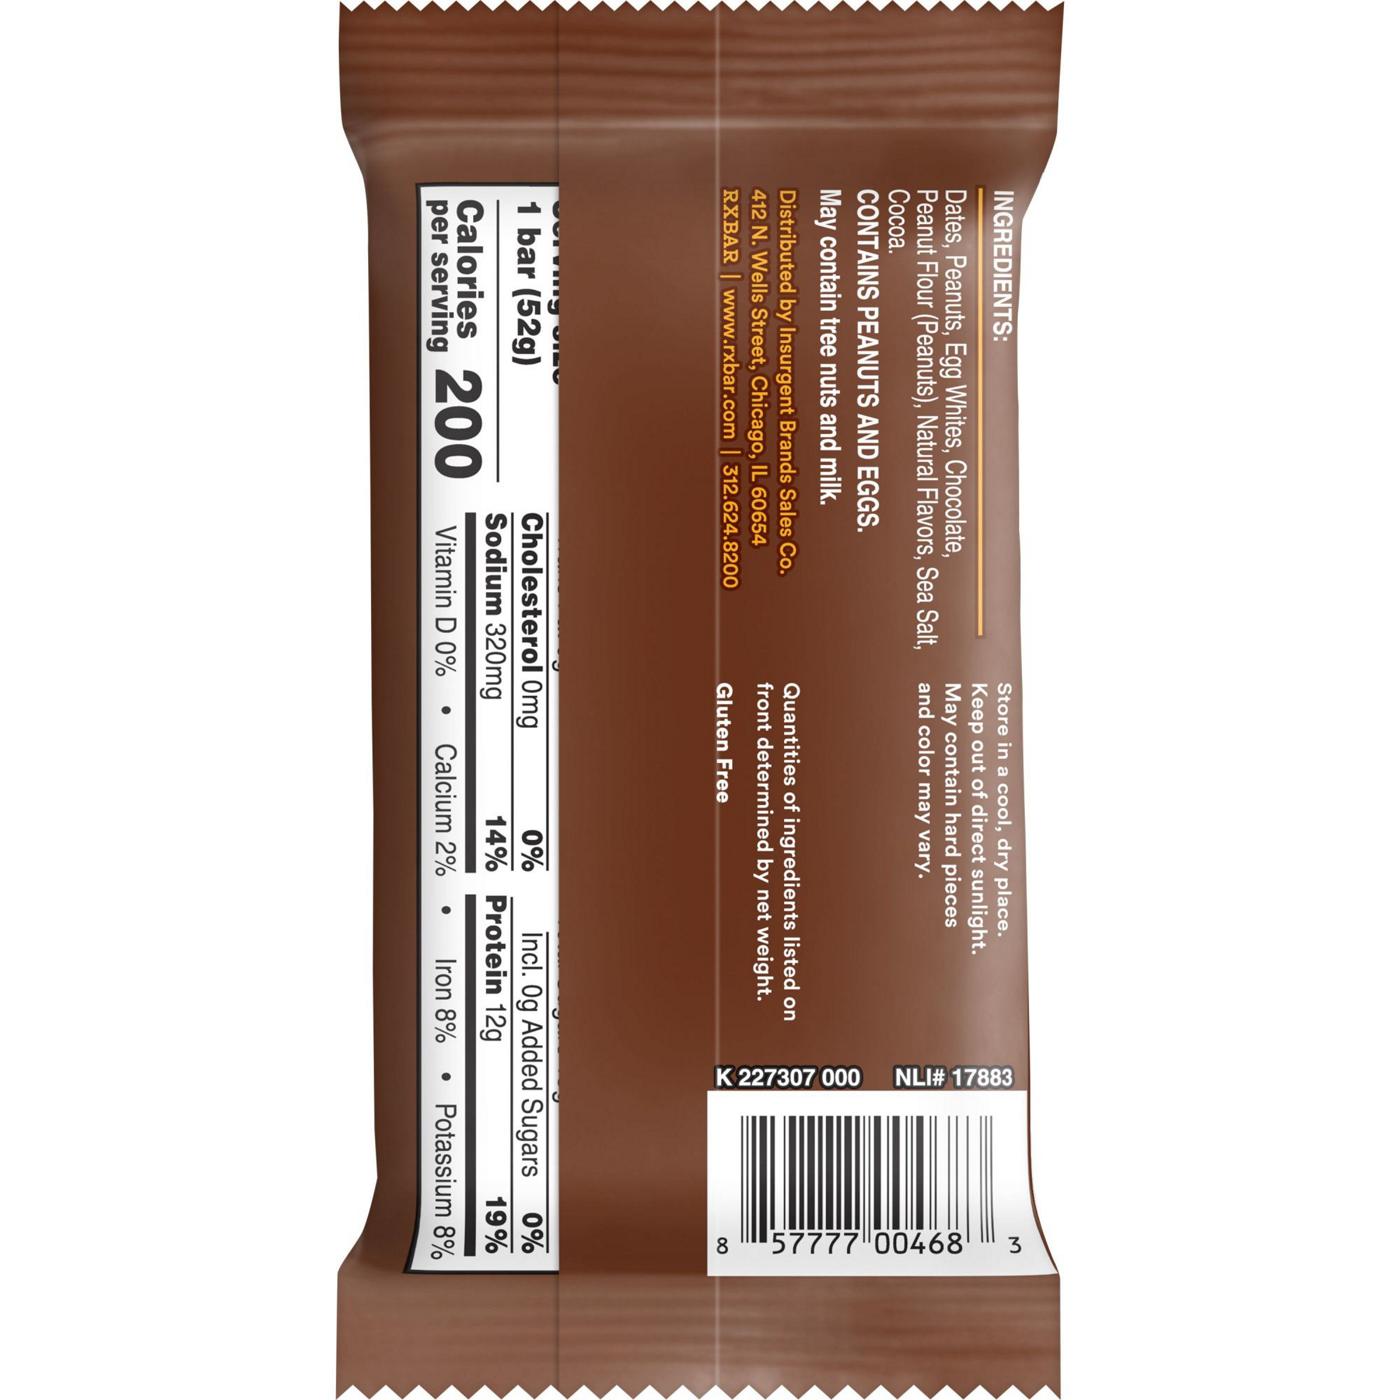 RXBAR Peanut Butter Chocolate Protein Bars; image 3 of 3